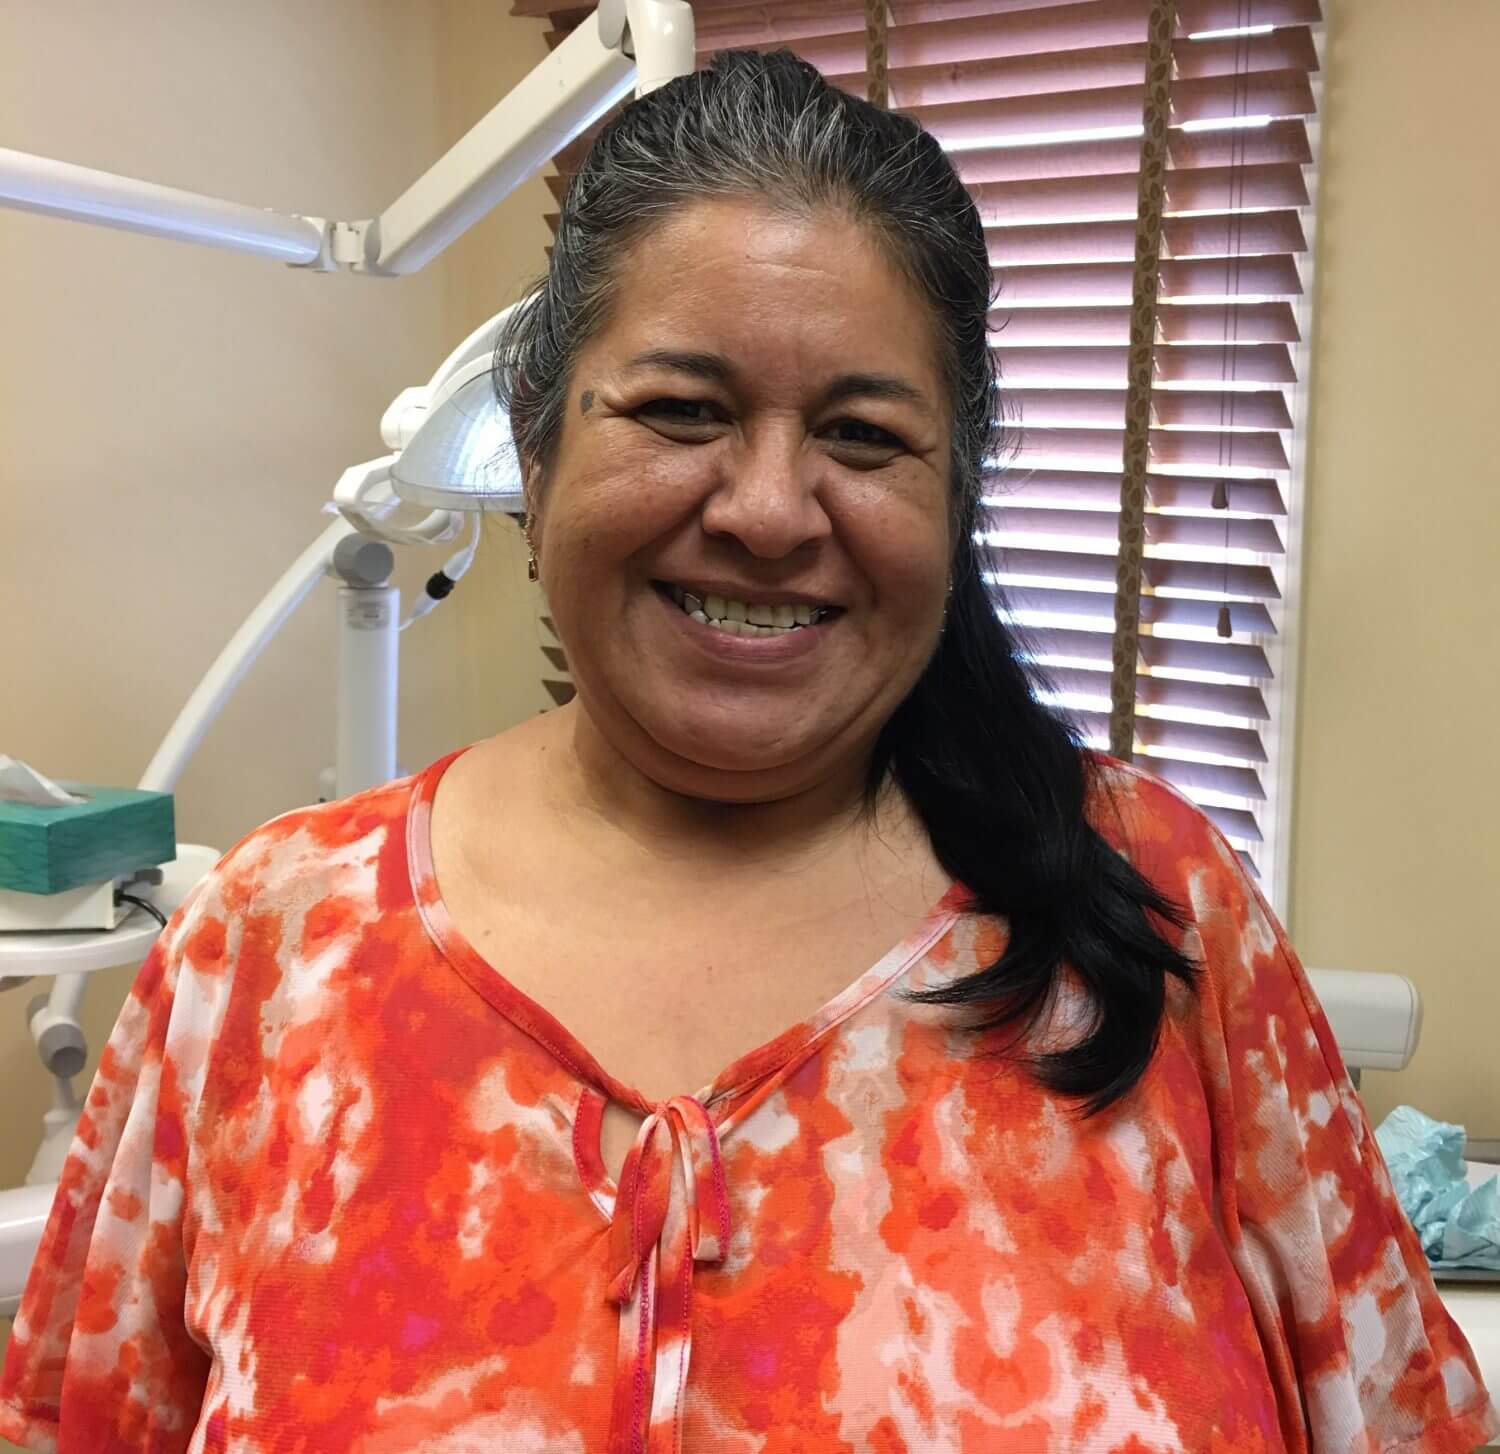 DLN Success Story – DDS Helps New Jersey Grandmother With Much Needed Dental Care